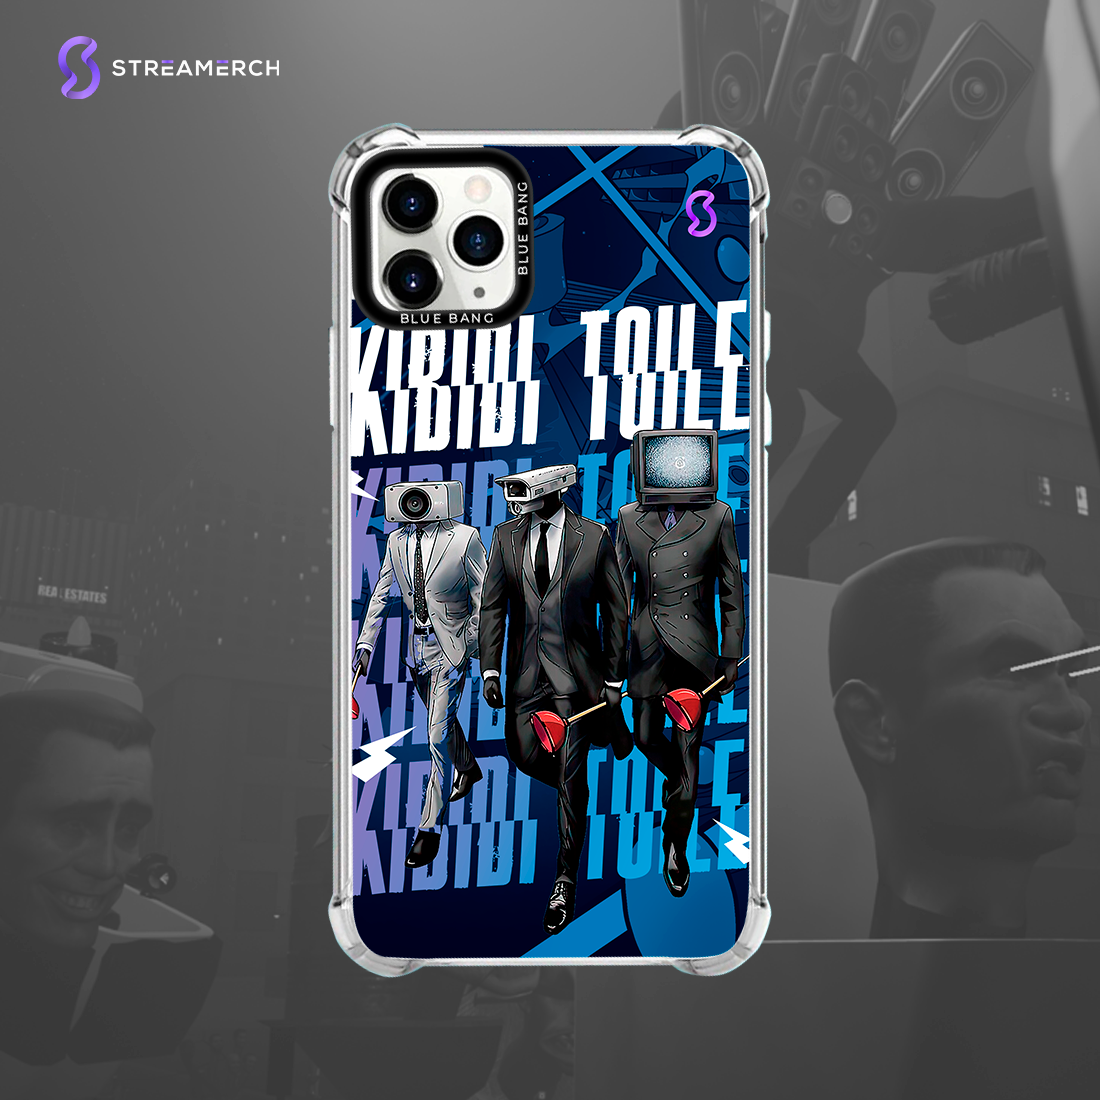 "Skibidi Toilets" holographic cell phone case